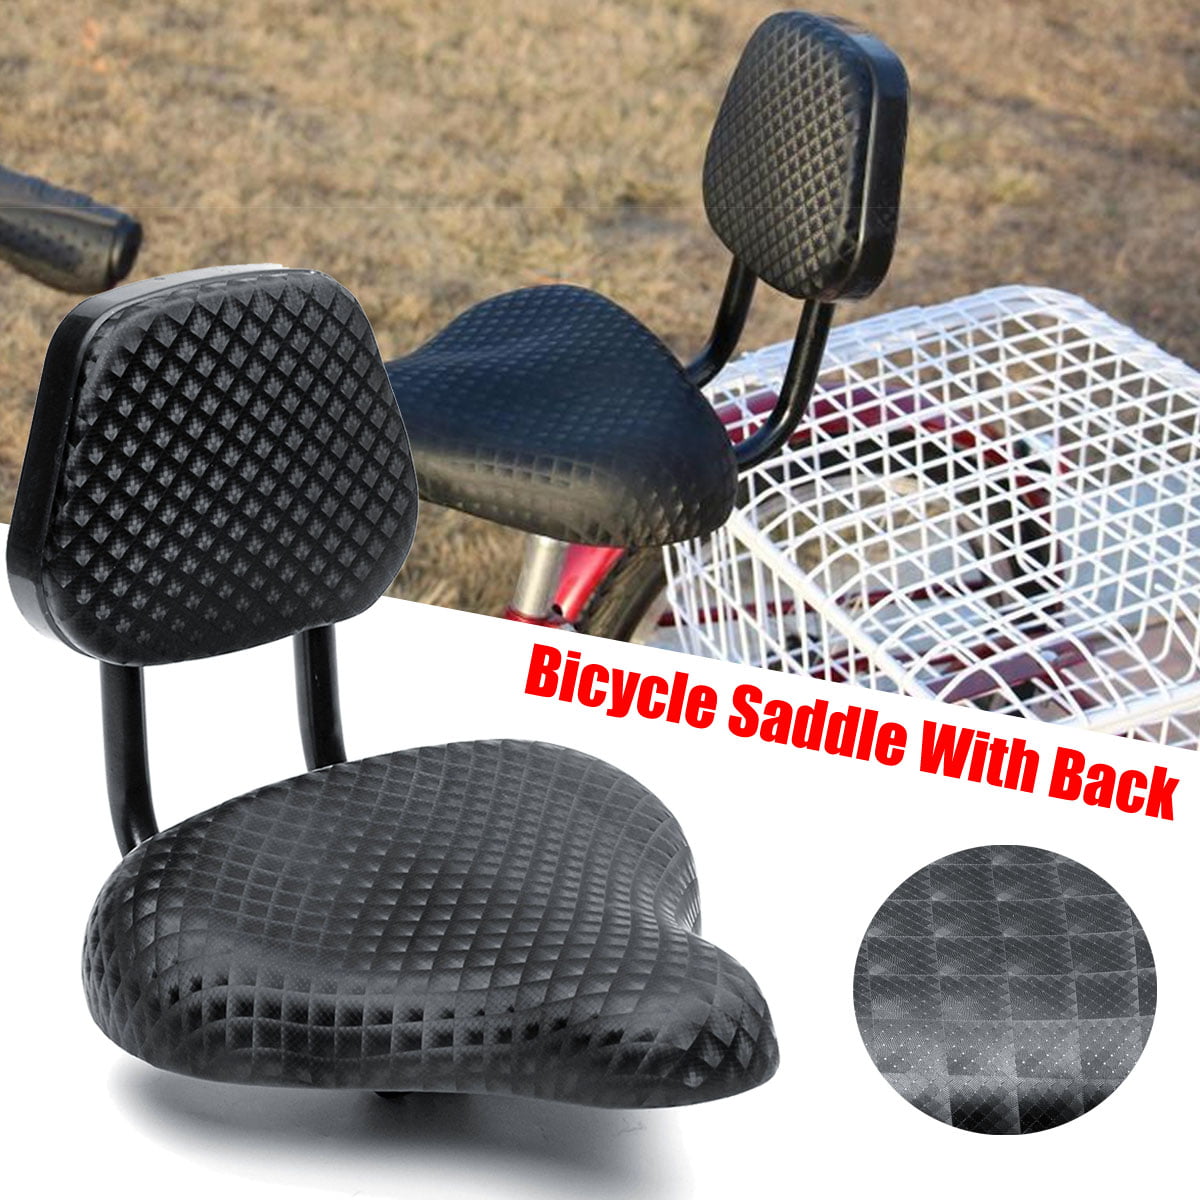 Back Details about   US Comfort Cruiser Tricycle Bike Bicycle Saddle Seat Pad Universal 